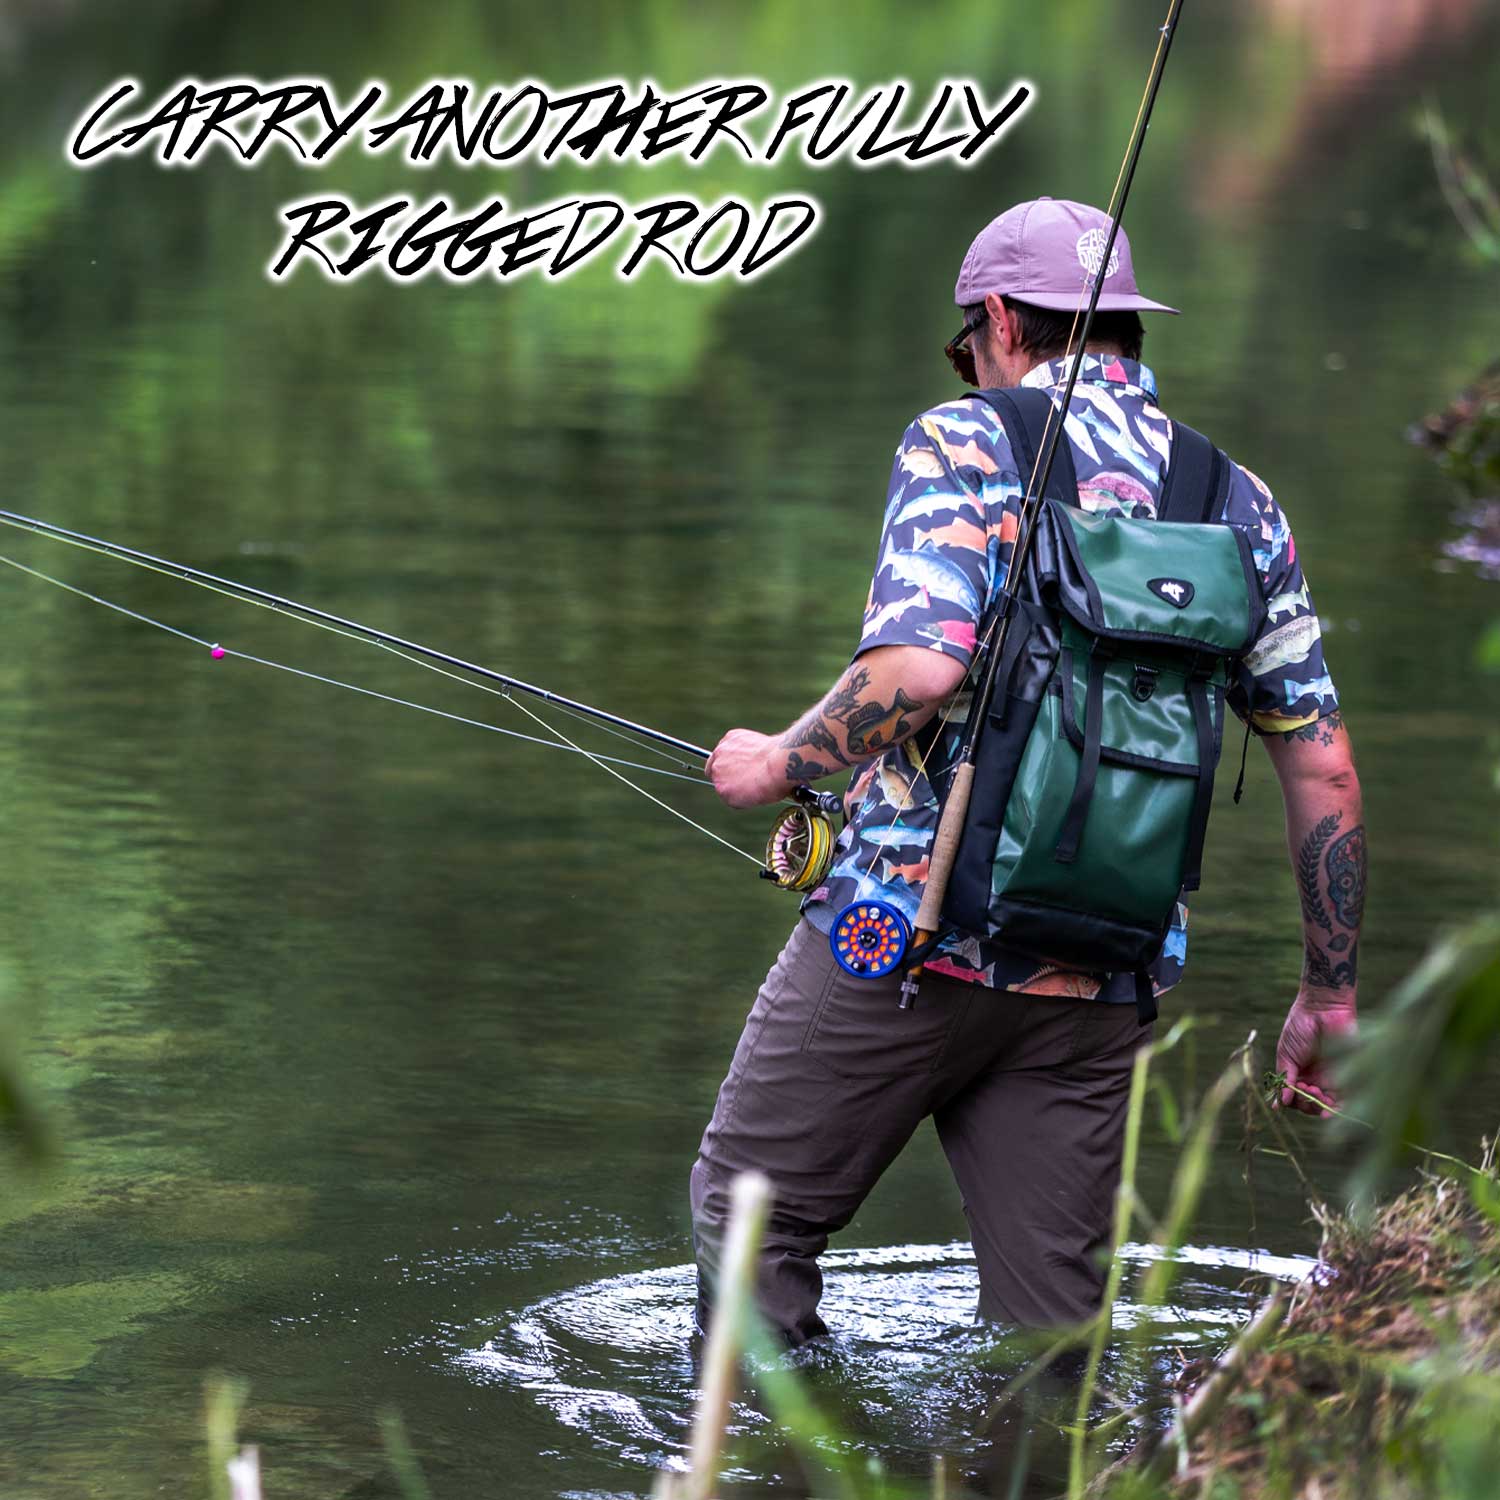 VEDAVOO on X: Carry multiple fully rigged rods with you on the